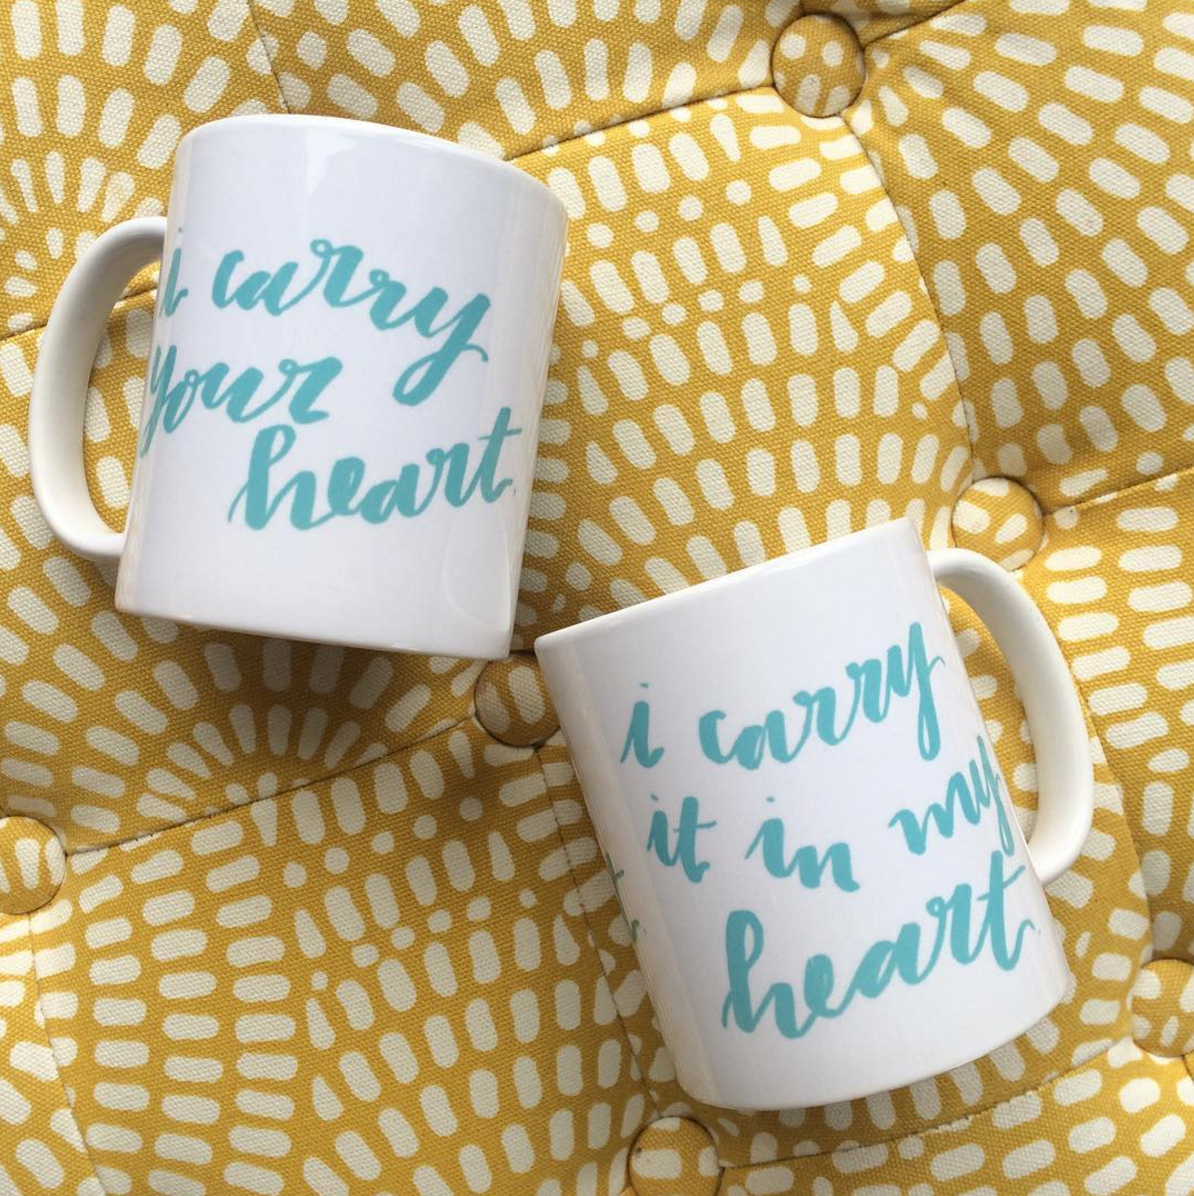 Lettering example of mug with ee cummings quote I carry your heart